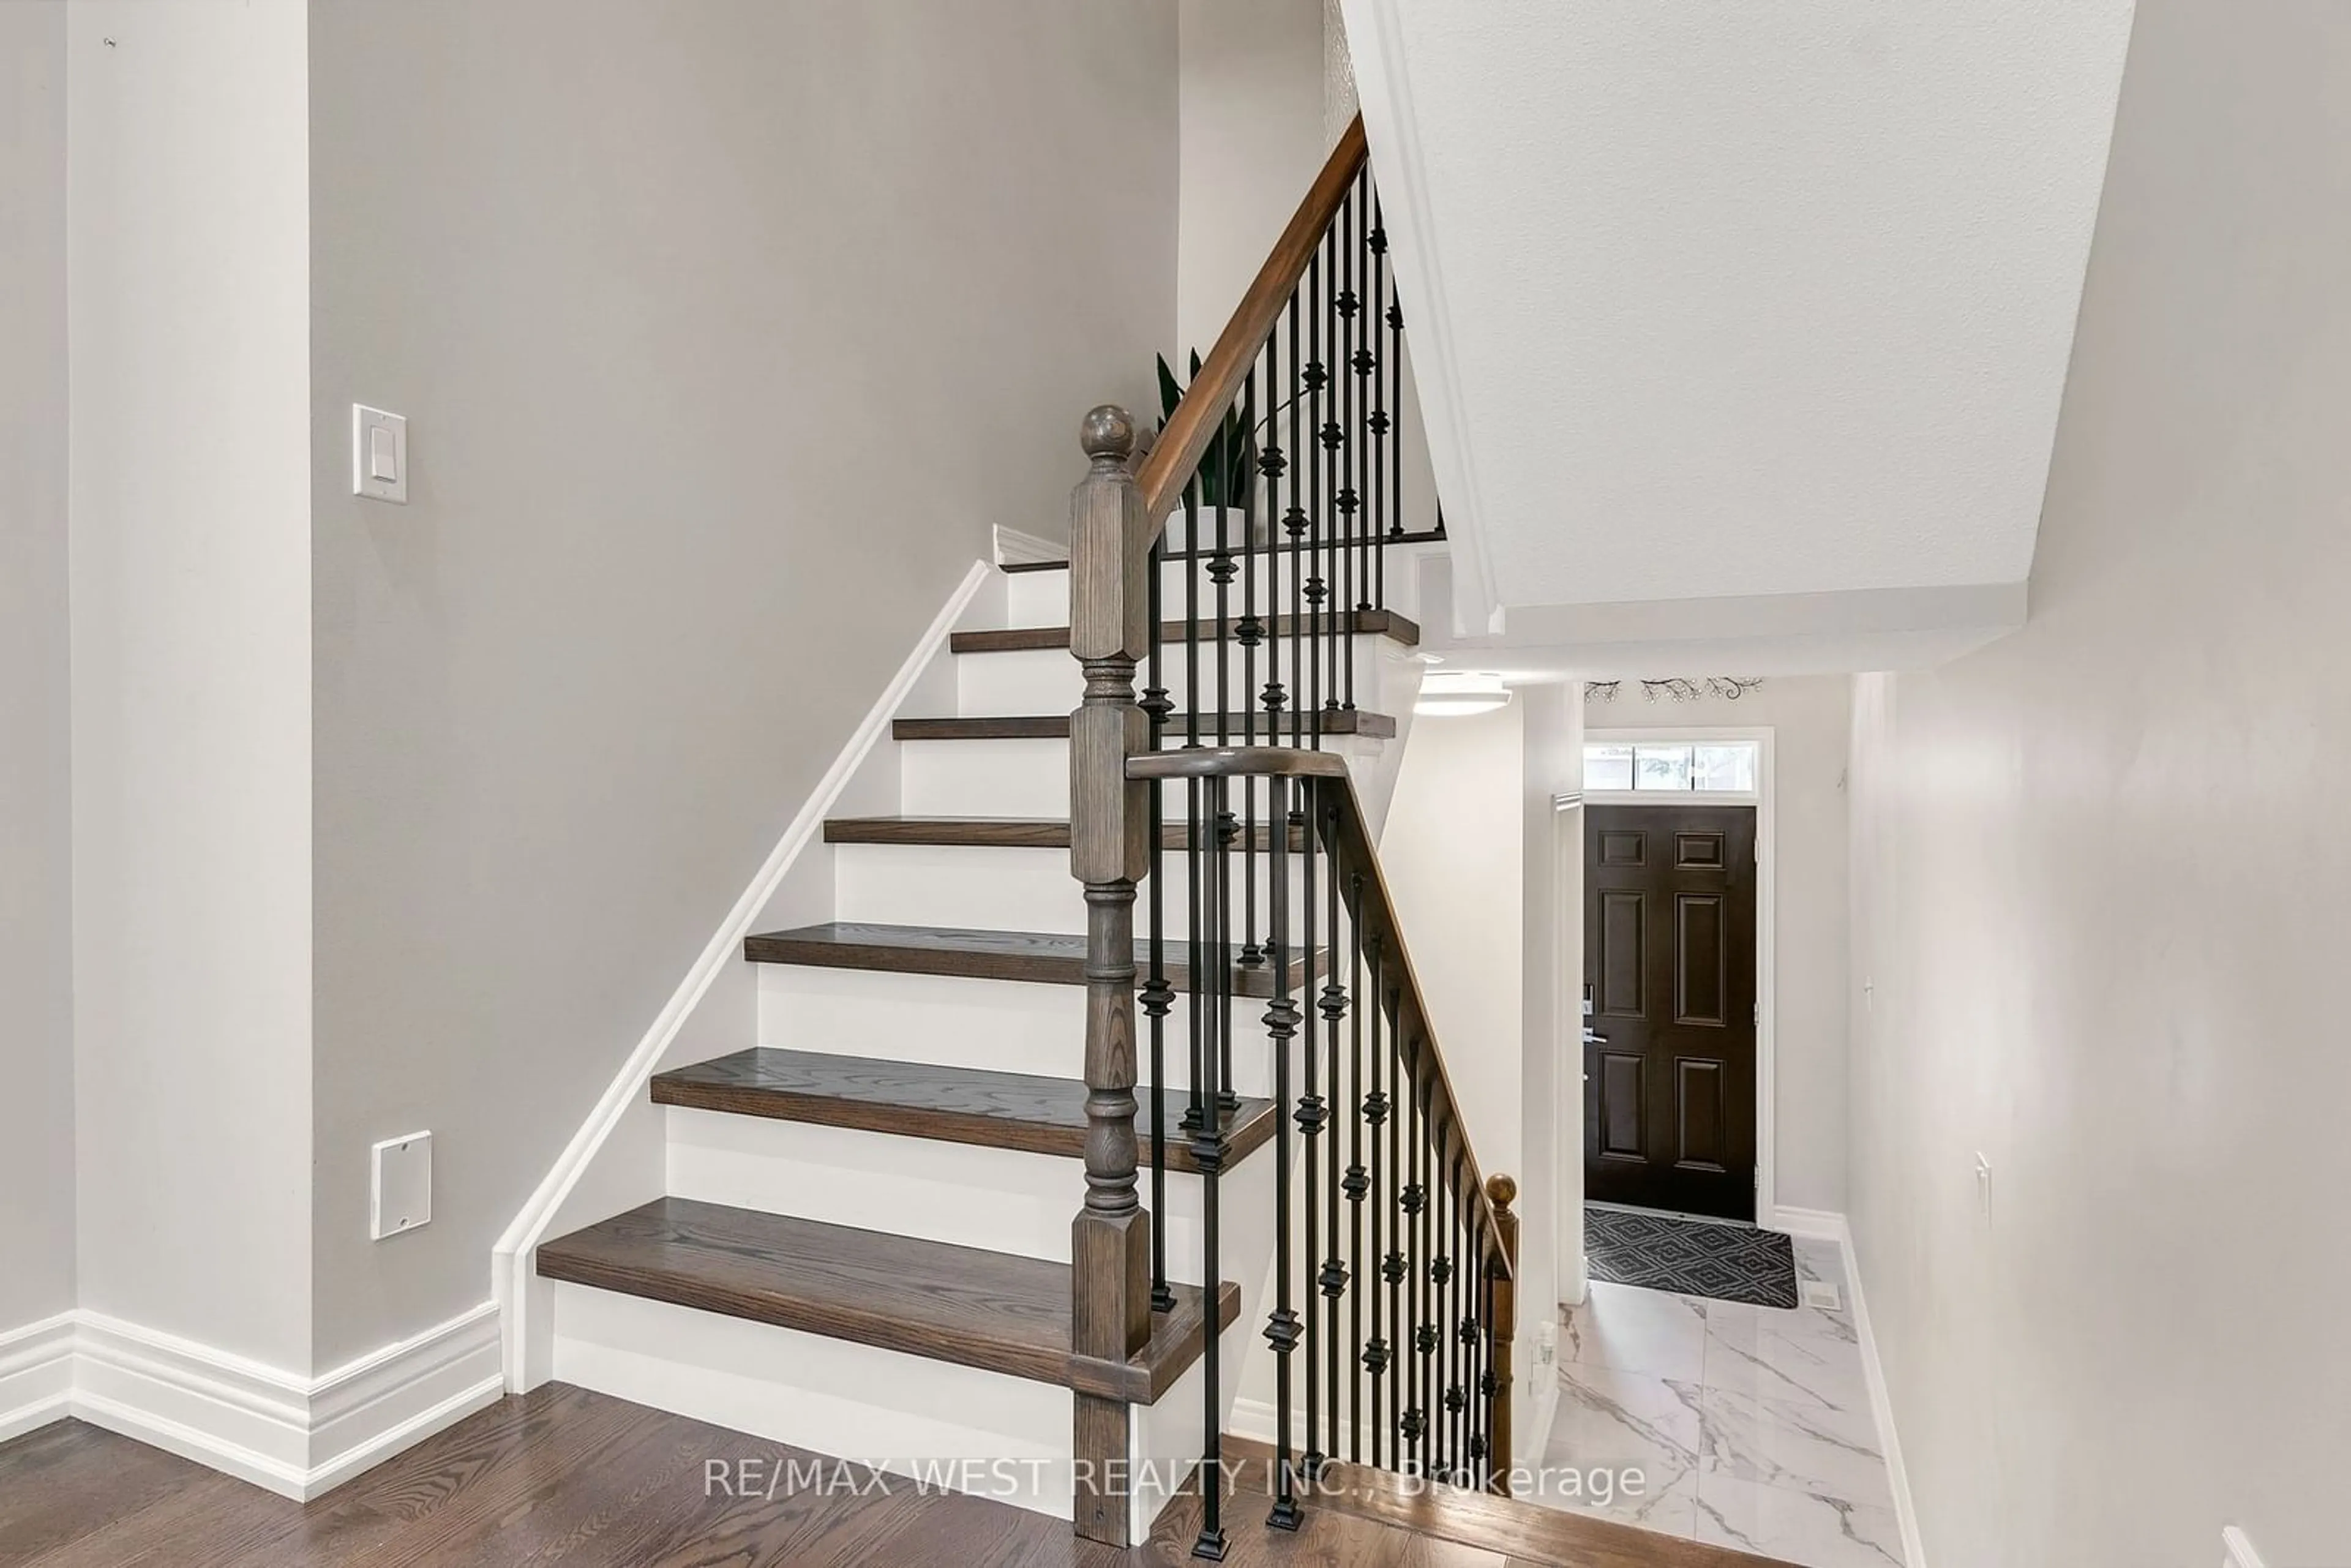 Stairs for 139 Homestead Rd, Toronto Ontario M1E 3S1